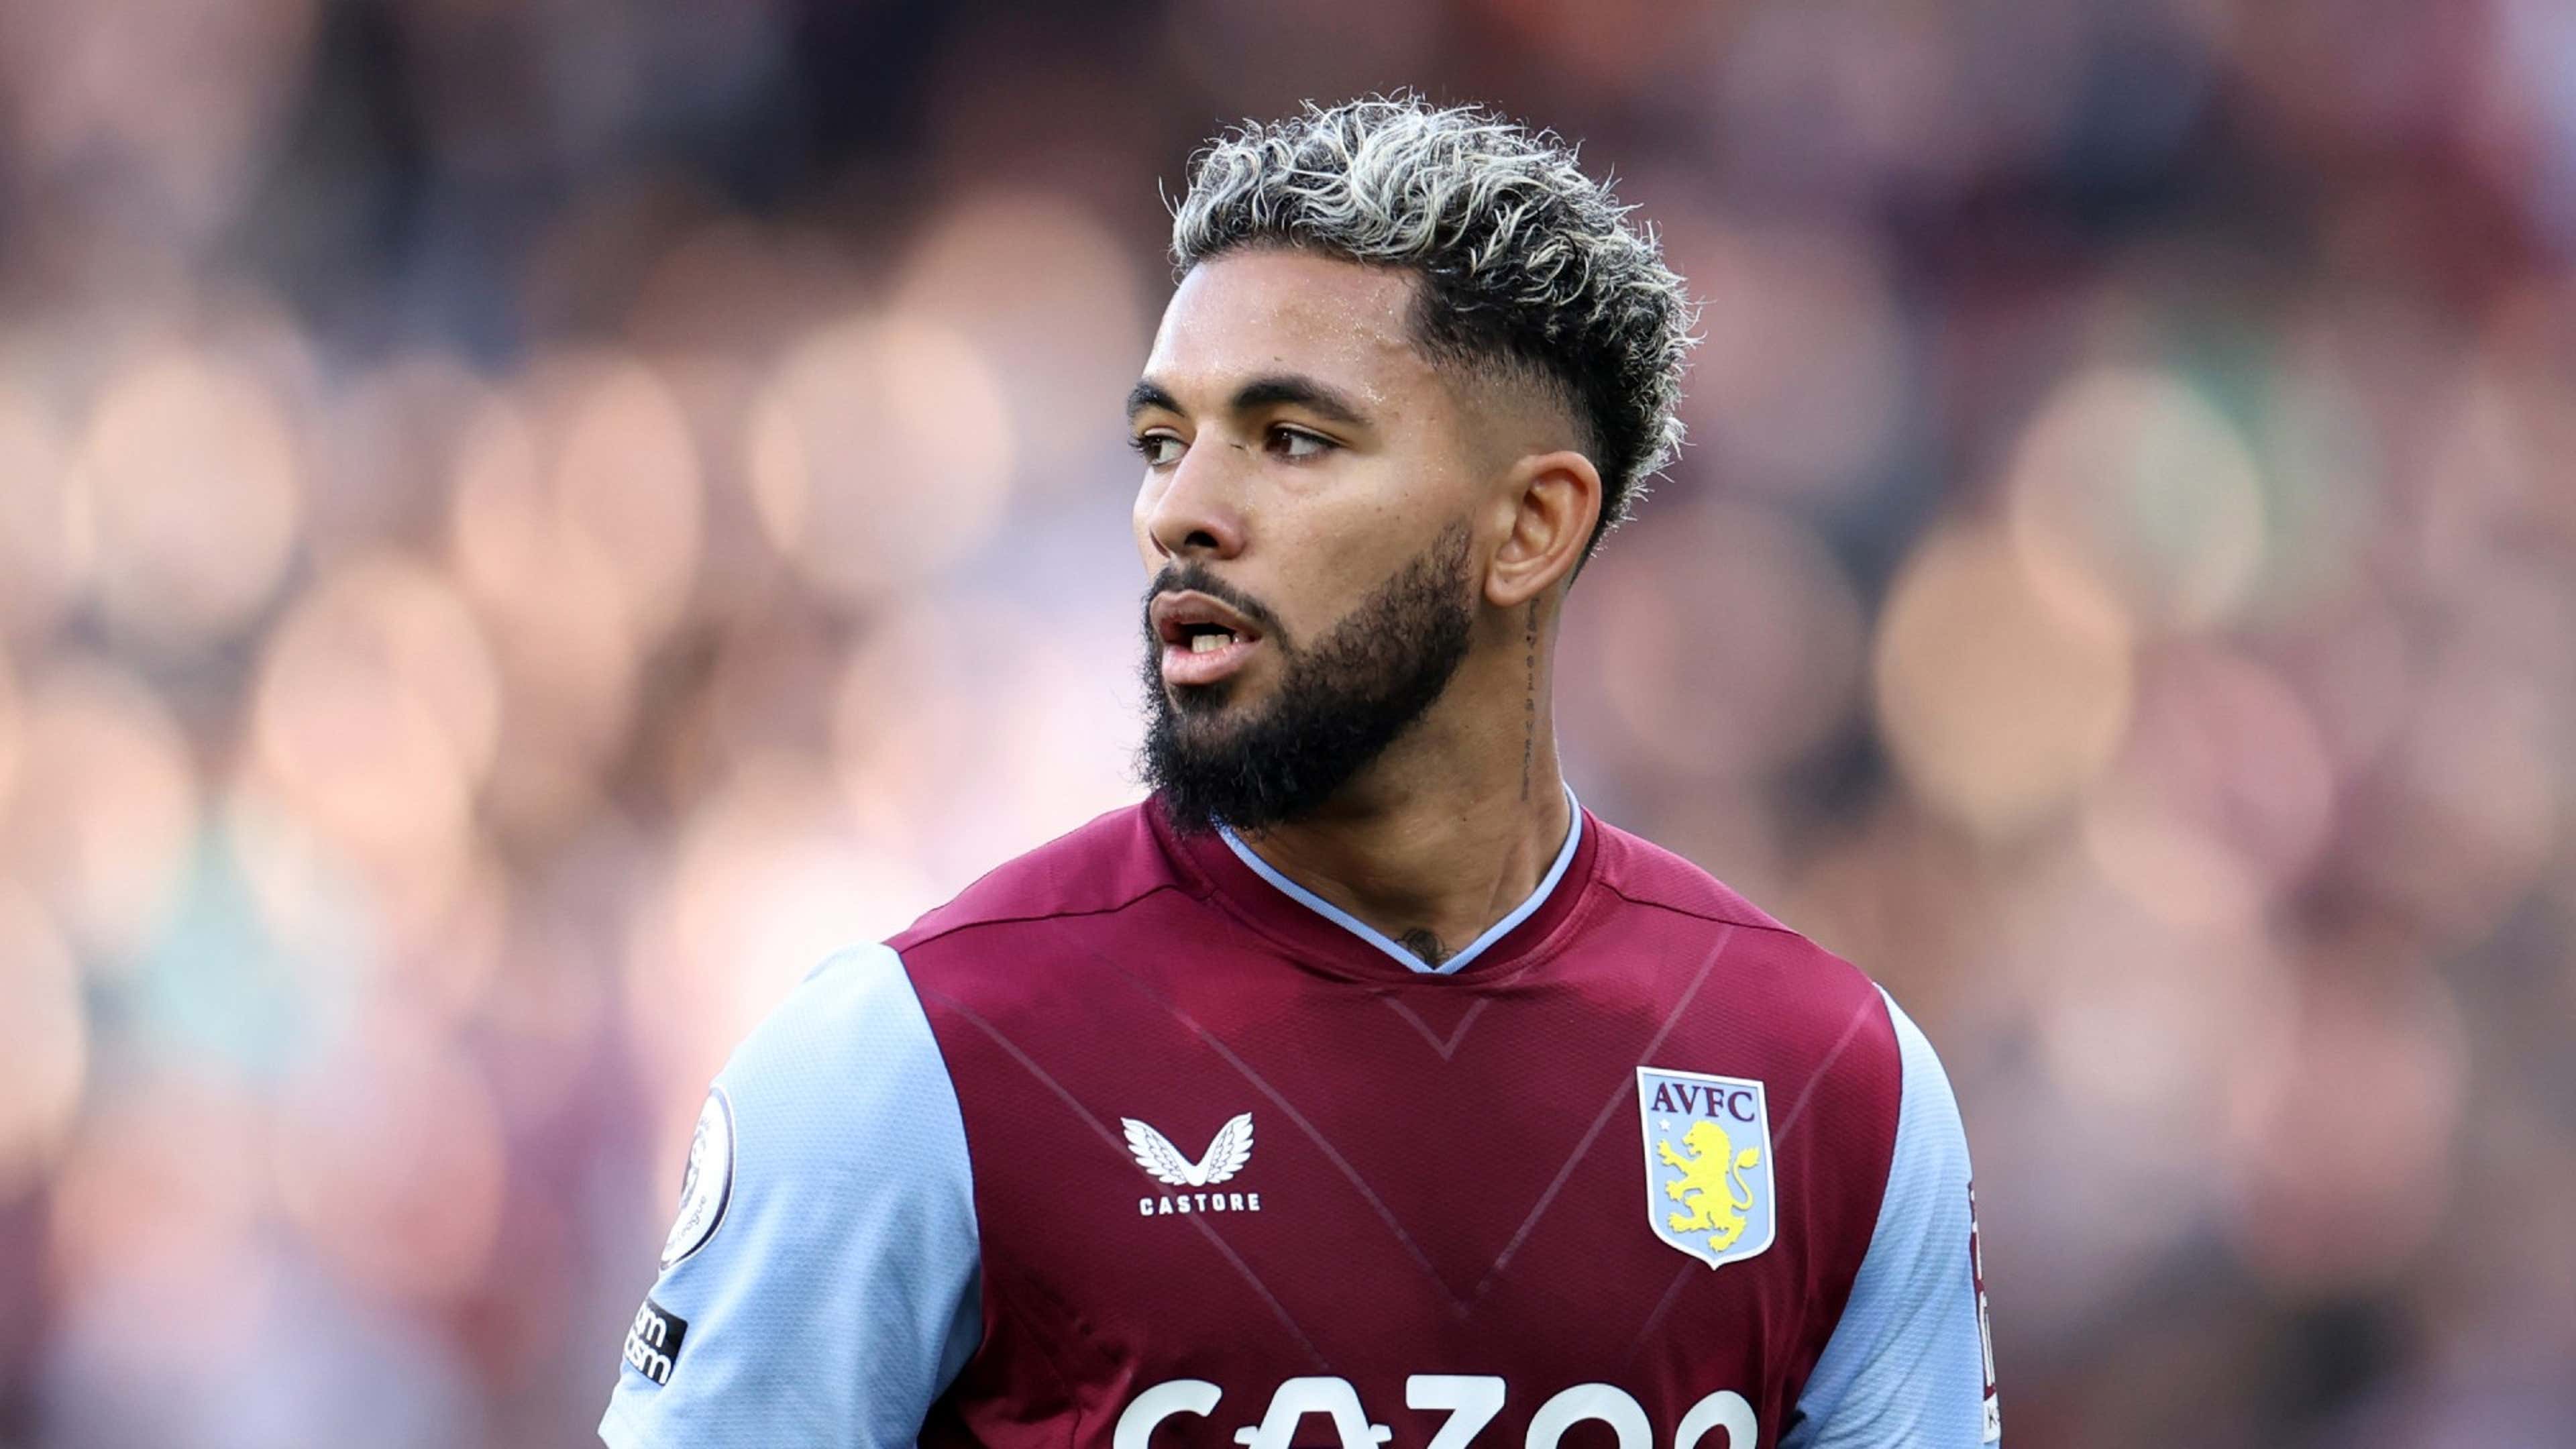 Transfer blow for Arsenal! Why Gunners will find it difficult to sign No.1  target Douglas Luiz from Aston Villa in January | Goal.com